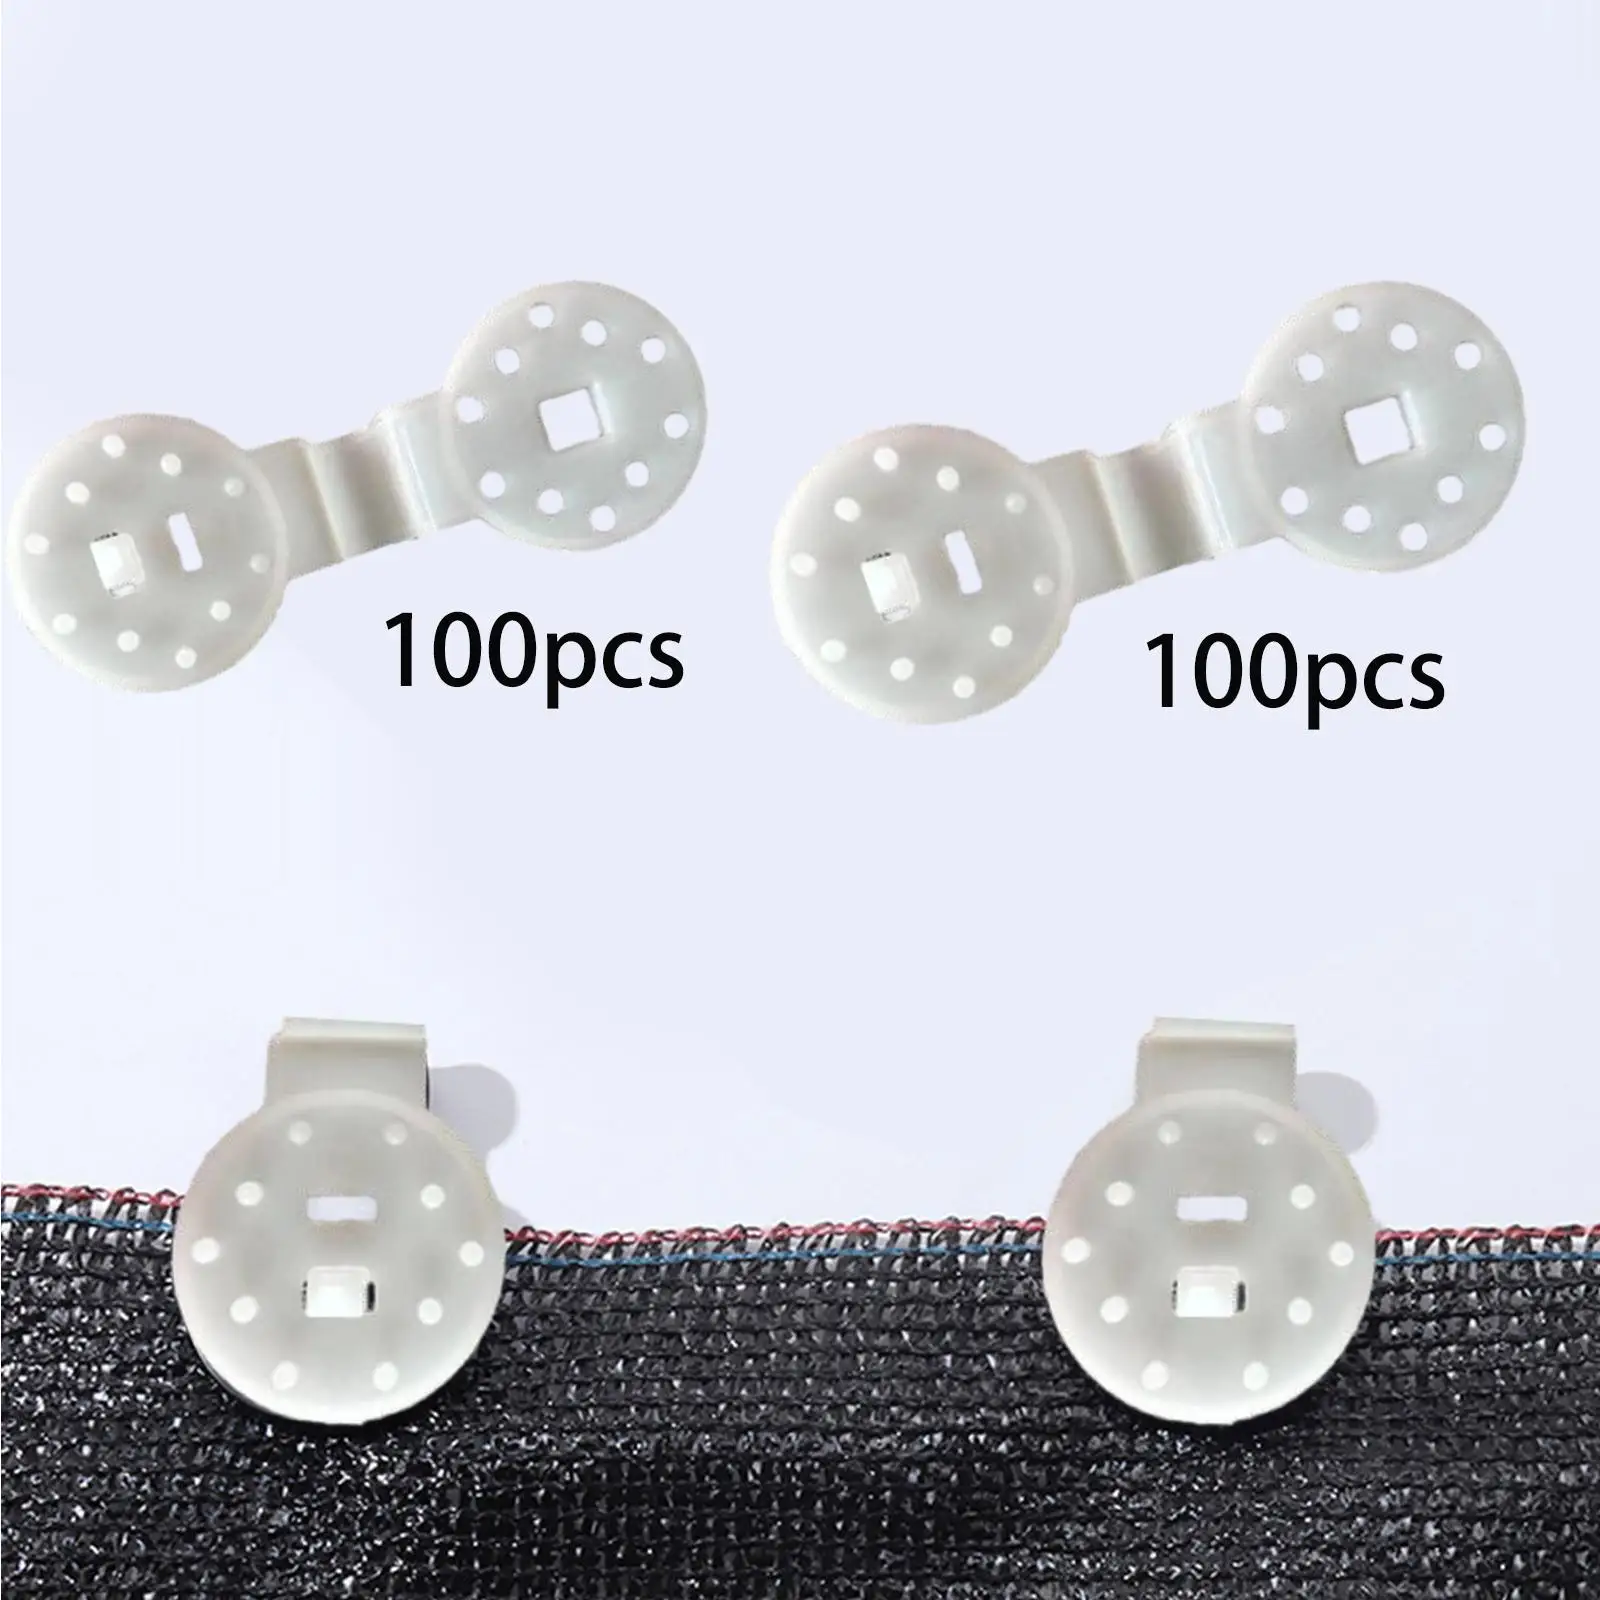 100Pcs Shade Cloth Clips Tightener Shade Net Clips Awning Clamp for Patio Yard Car Cover Shade Net Anti Bird Netting